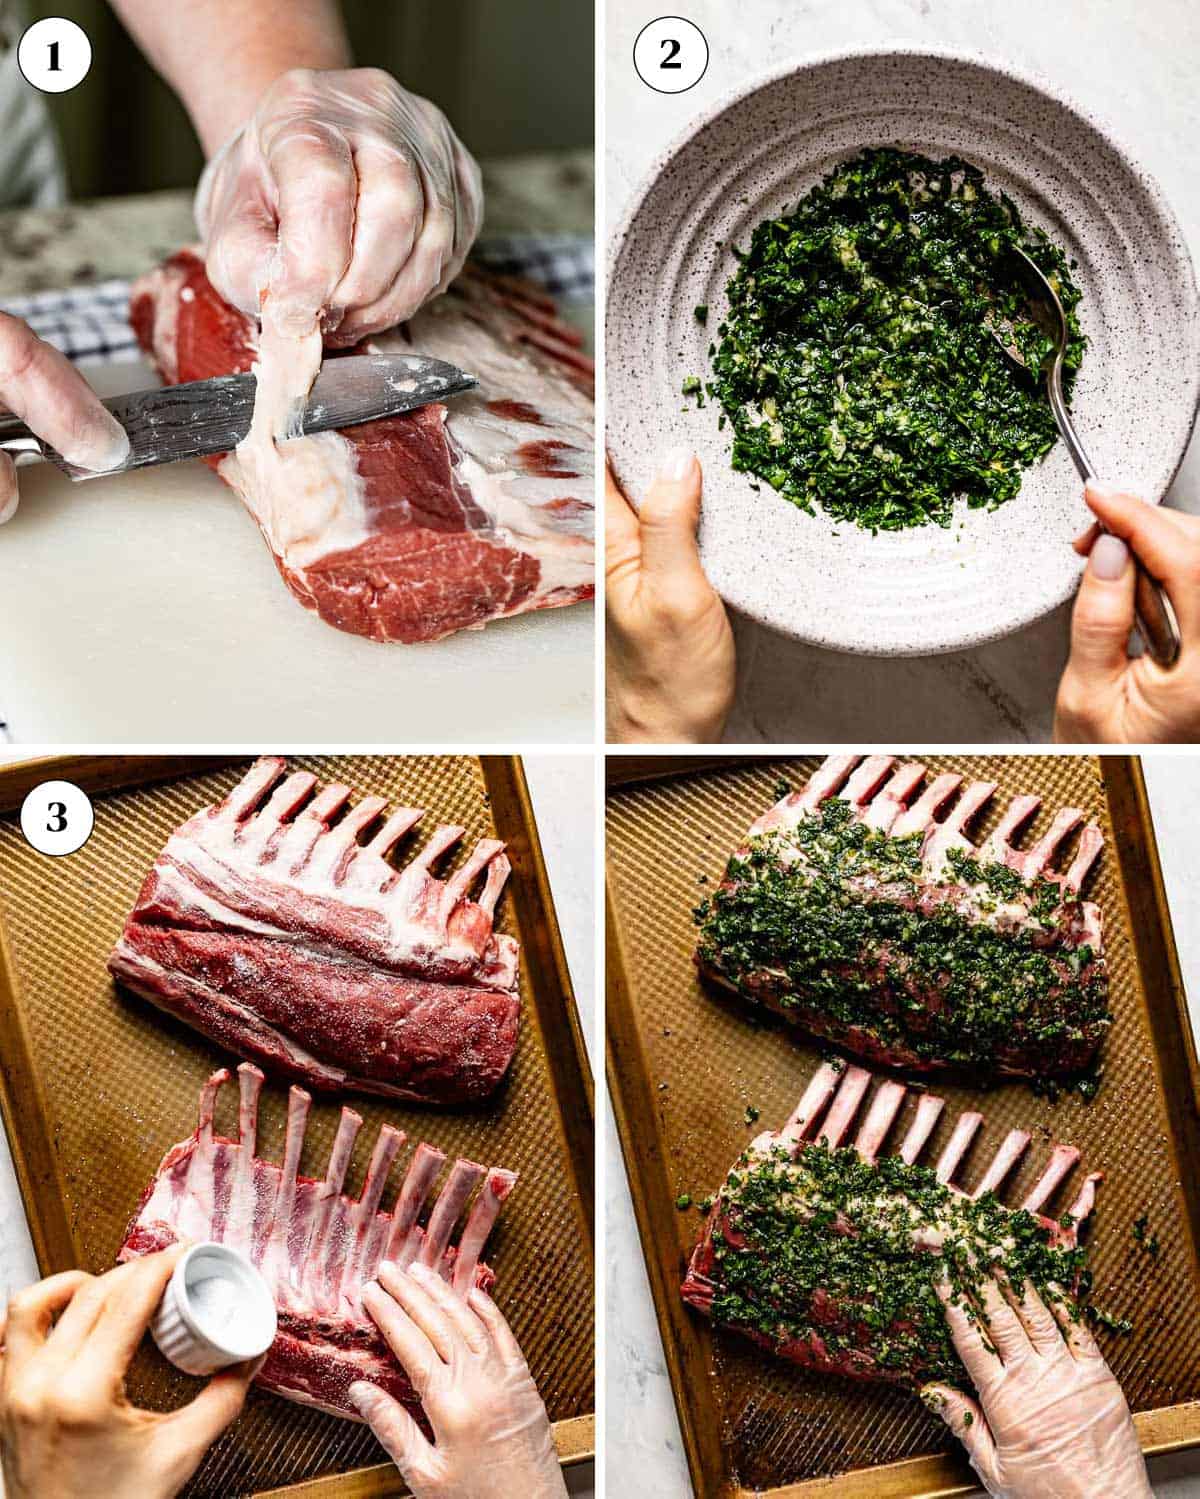 A collage of images showing a person preparing rack of lamb to cook it on gas grill.